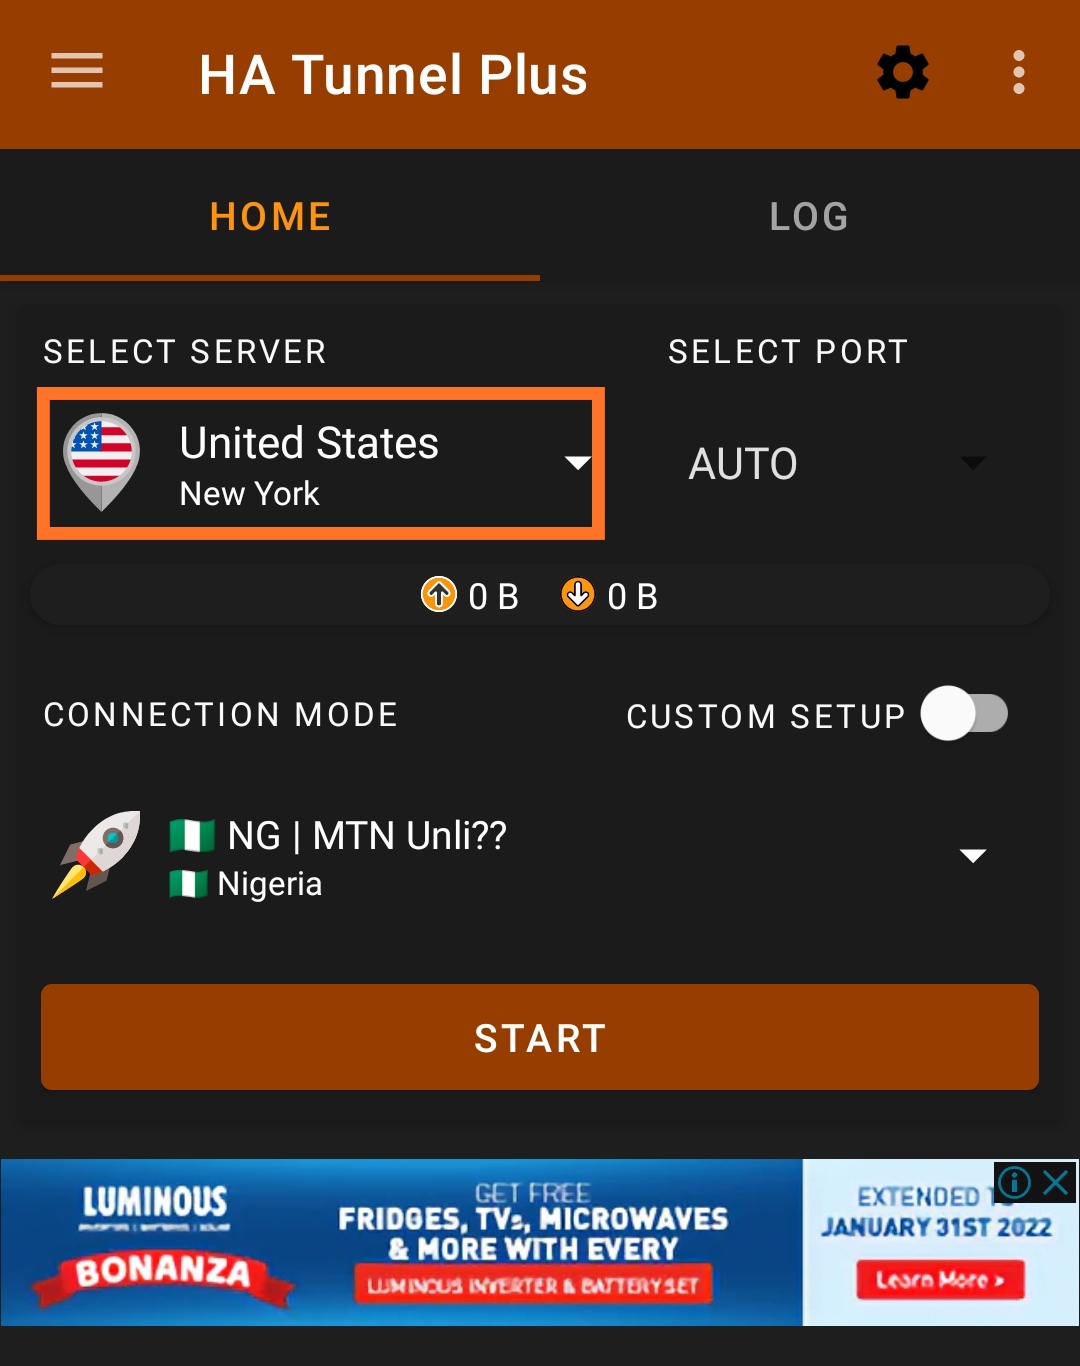 Mtn unlimited Free Browsing 2022